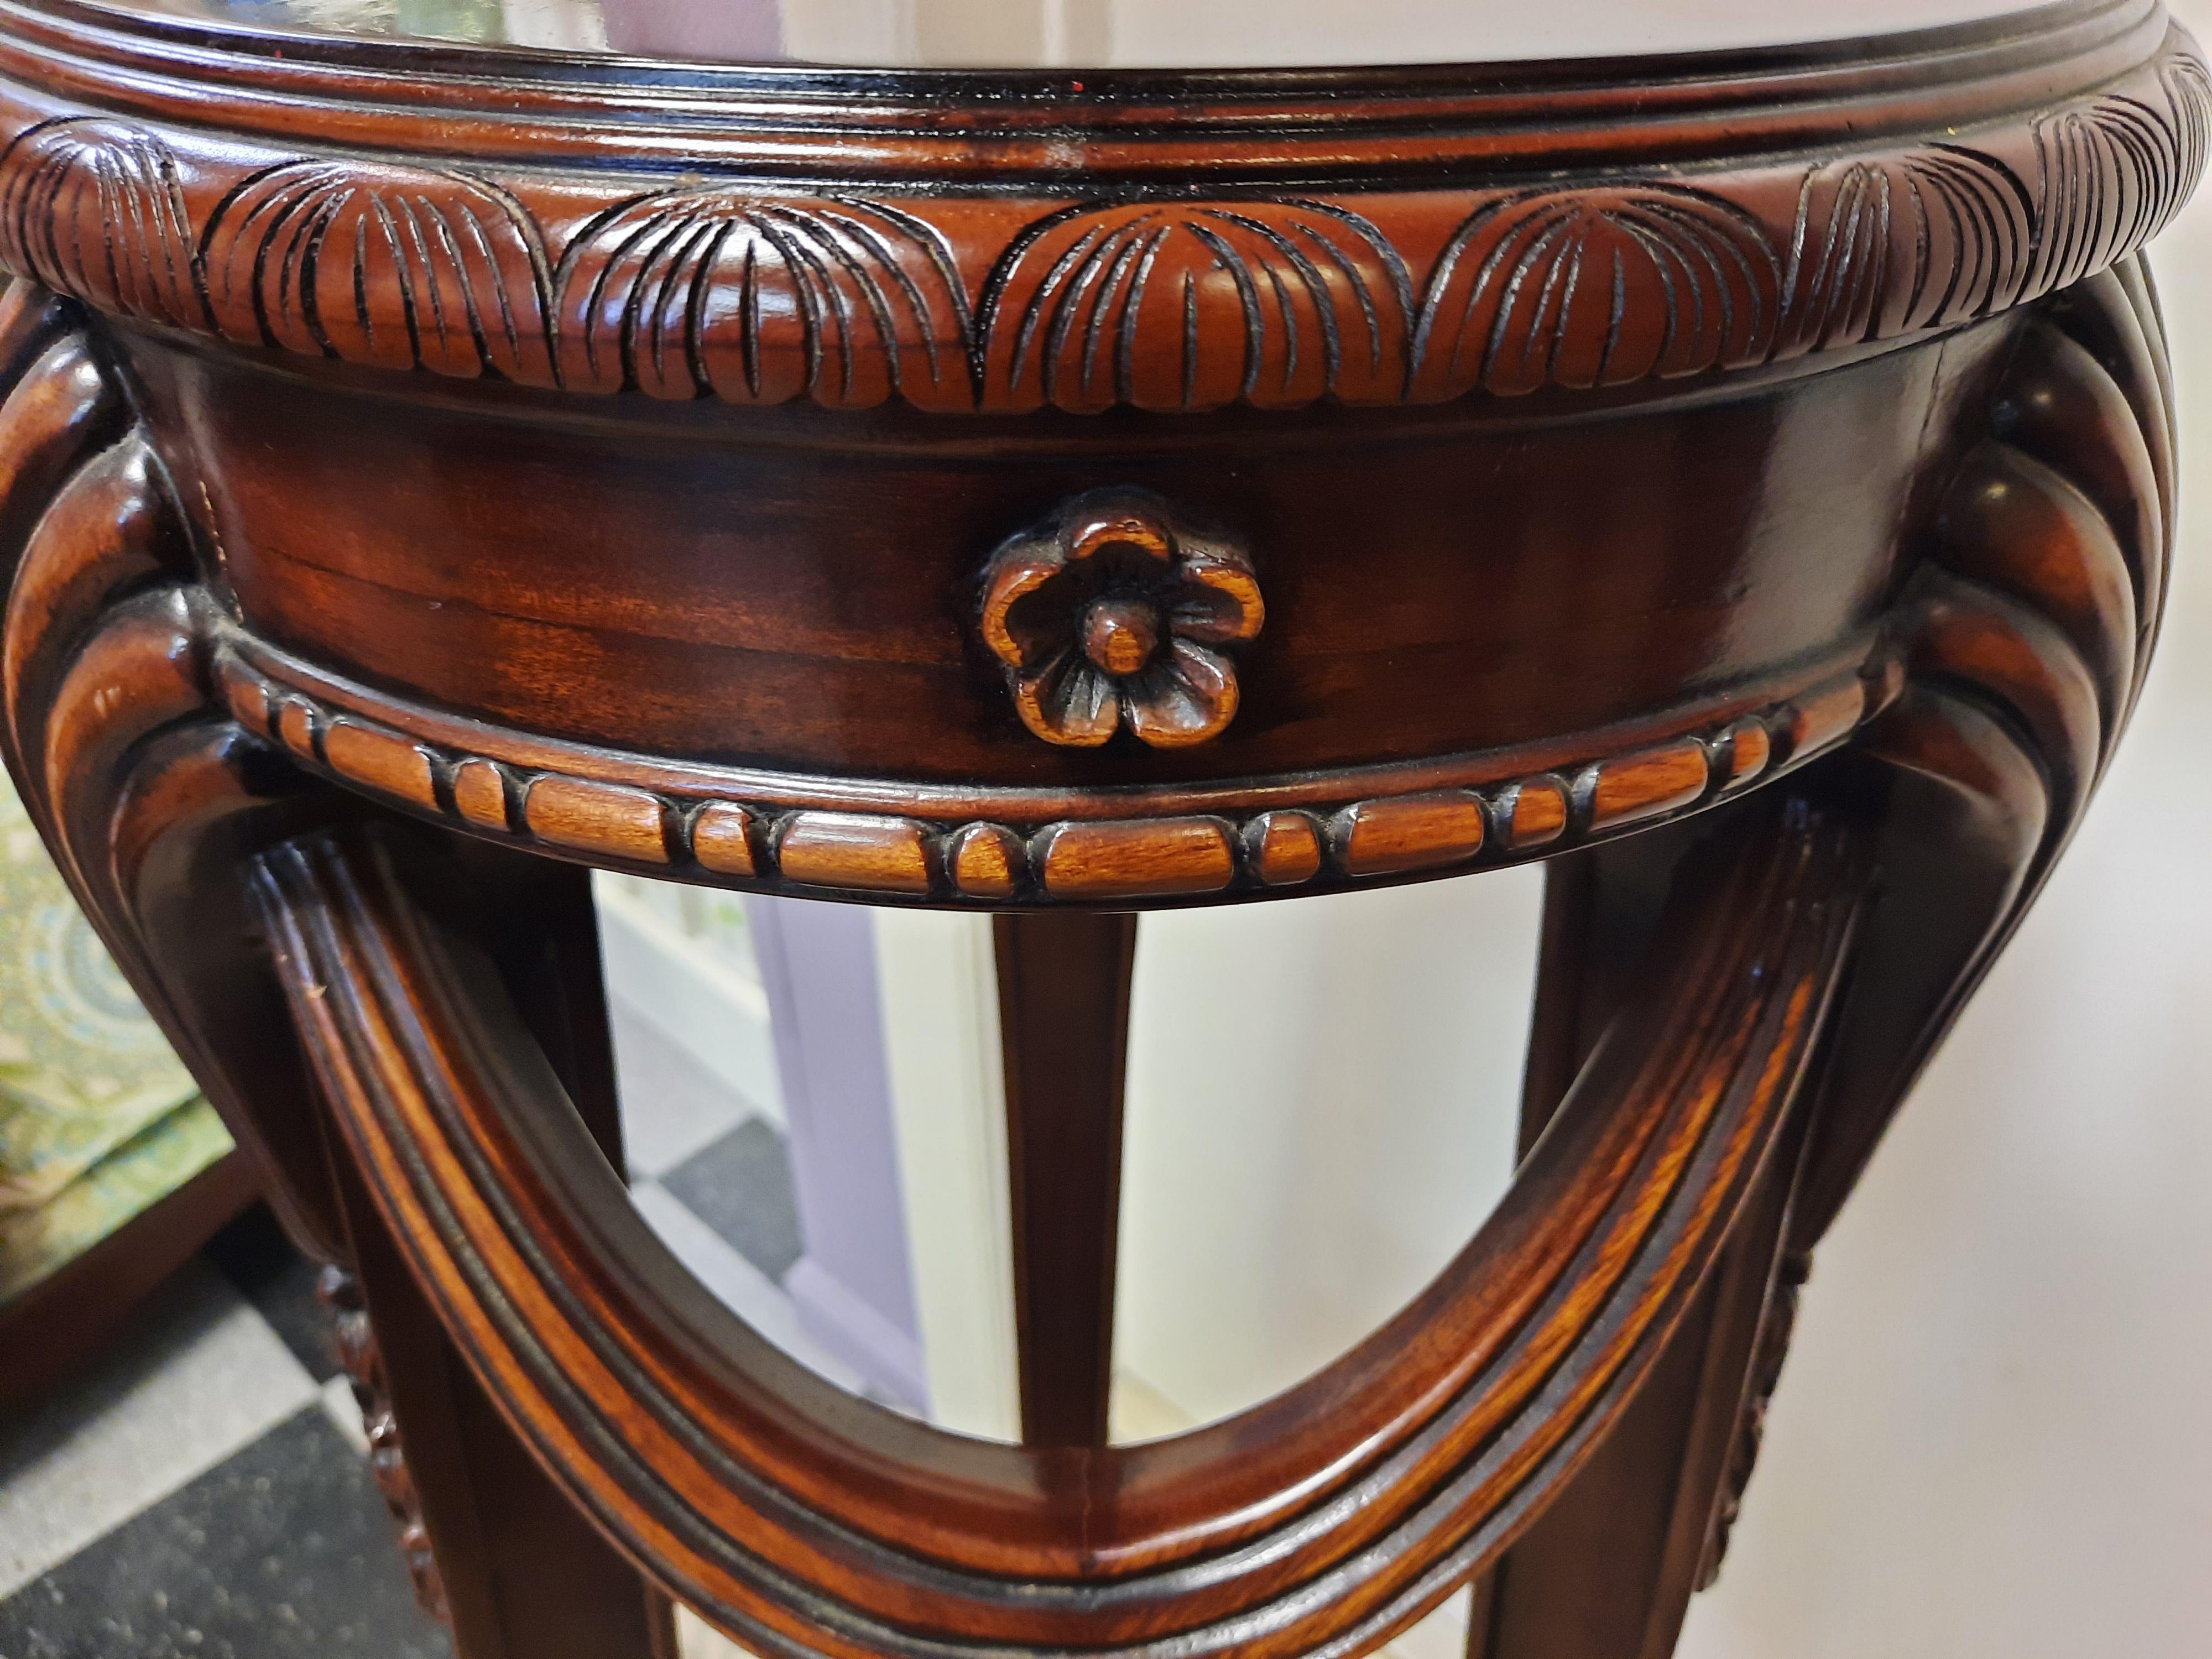 Vintage solid mahogany pedestal. Hand-carved with many traditional motifs, Shells, draped fabric and small floral designs are a few of the details on this elegant pedestal that is solid and heavy enough to hold a large sculpture or floral